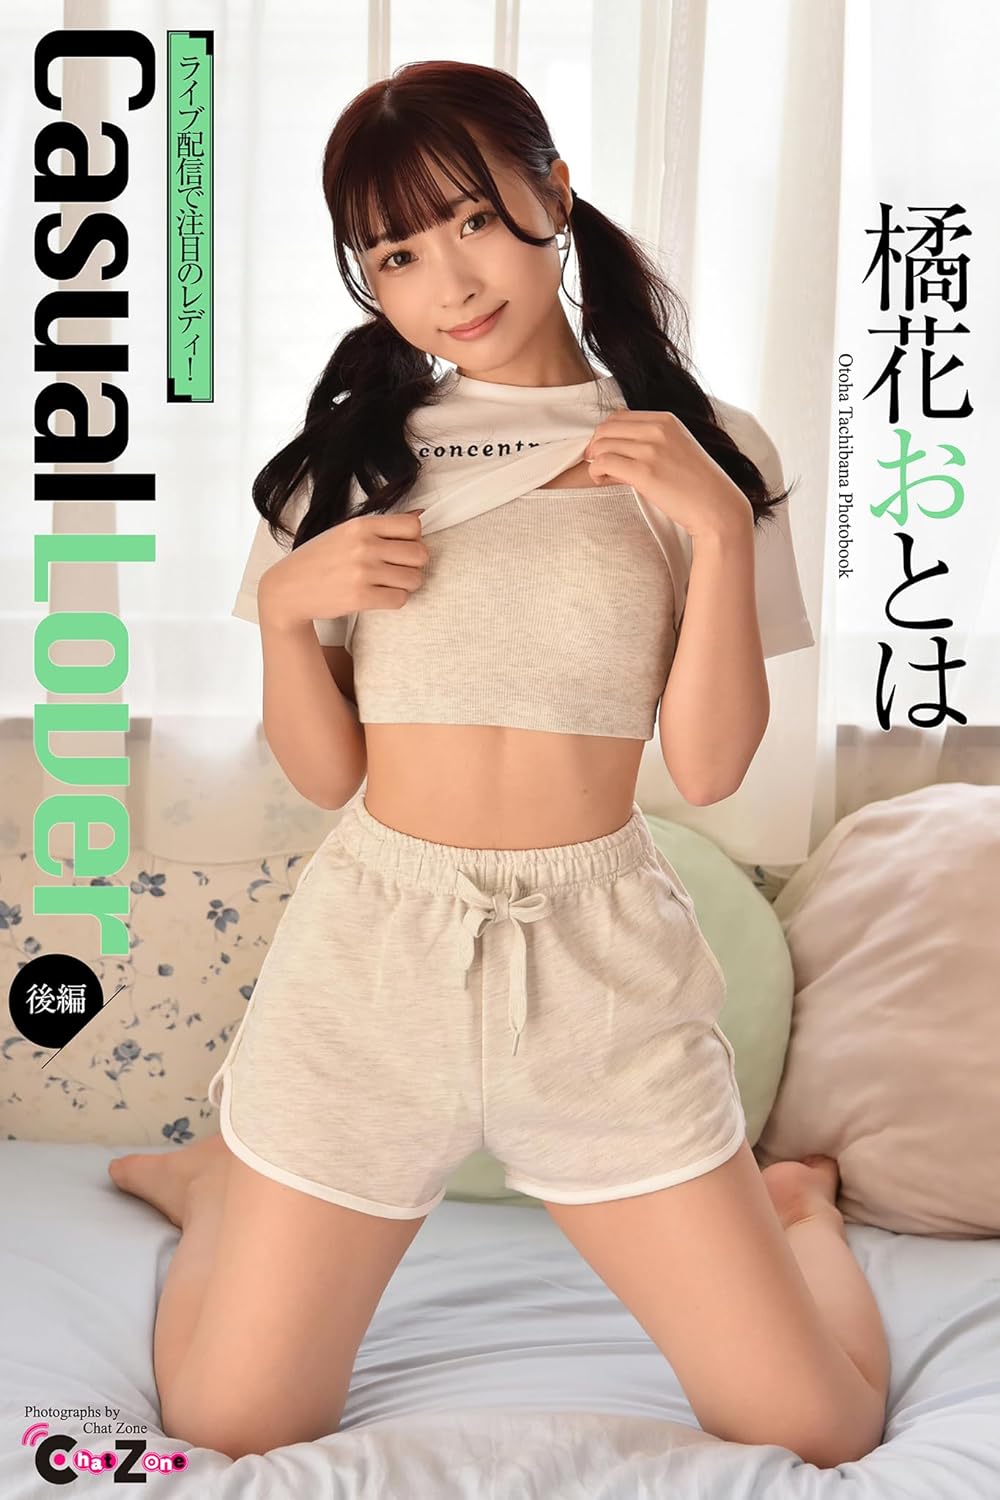 Chat Zone　橘花おとは 写真集　「Casual Lover　後編」 (ラビリンス) Kindle版 のサンプル画像